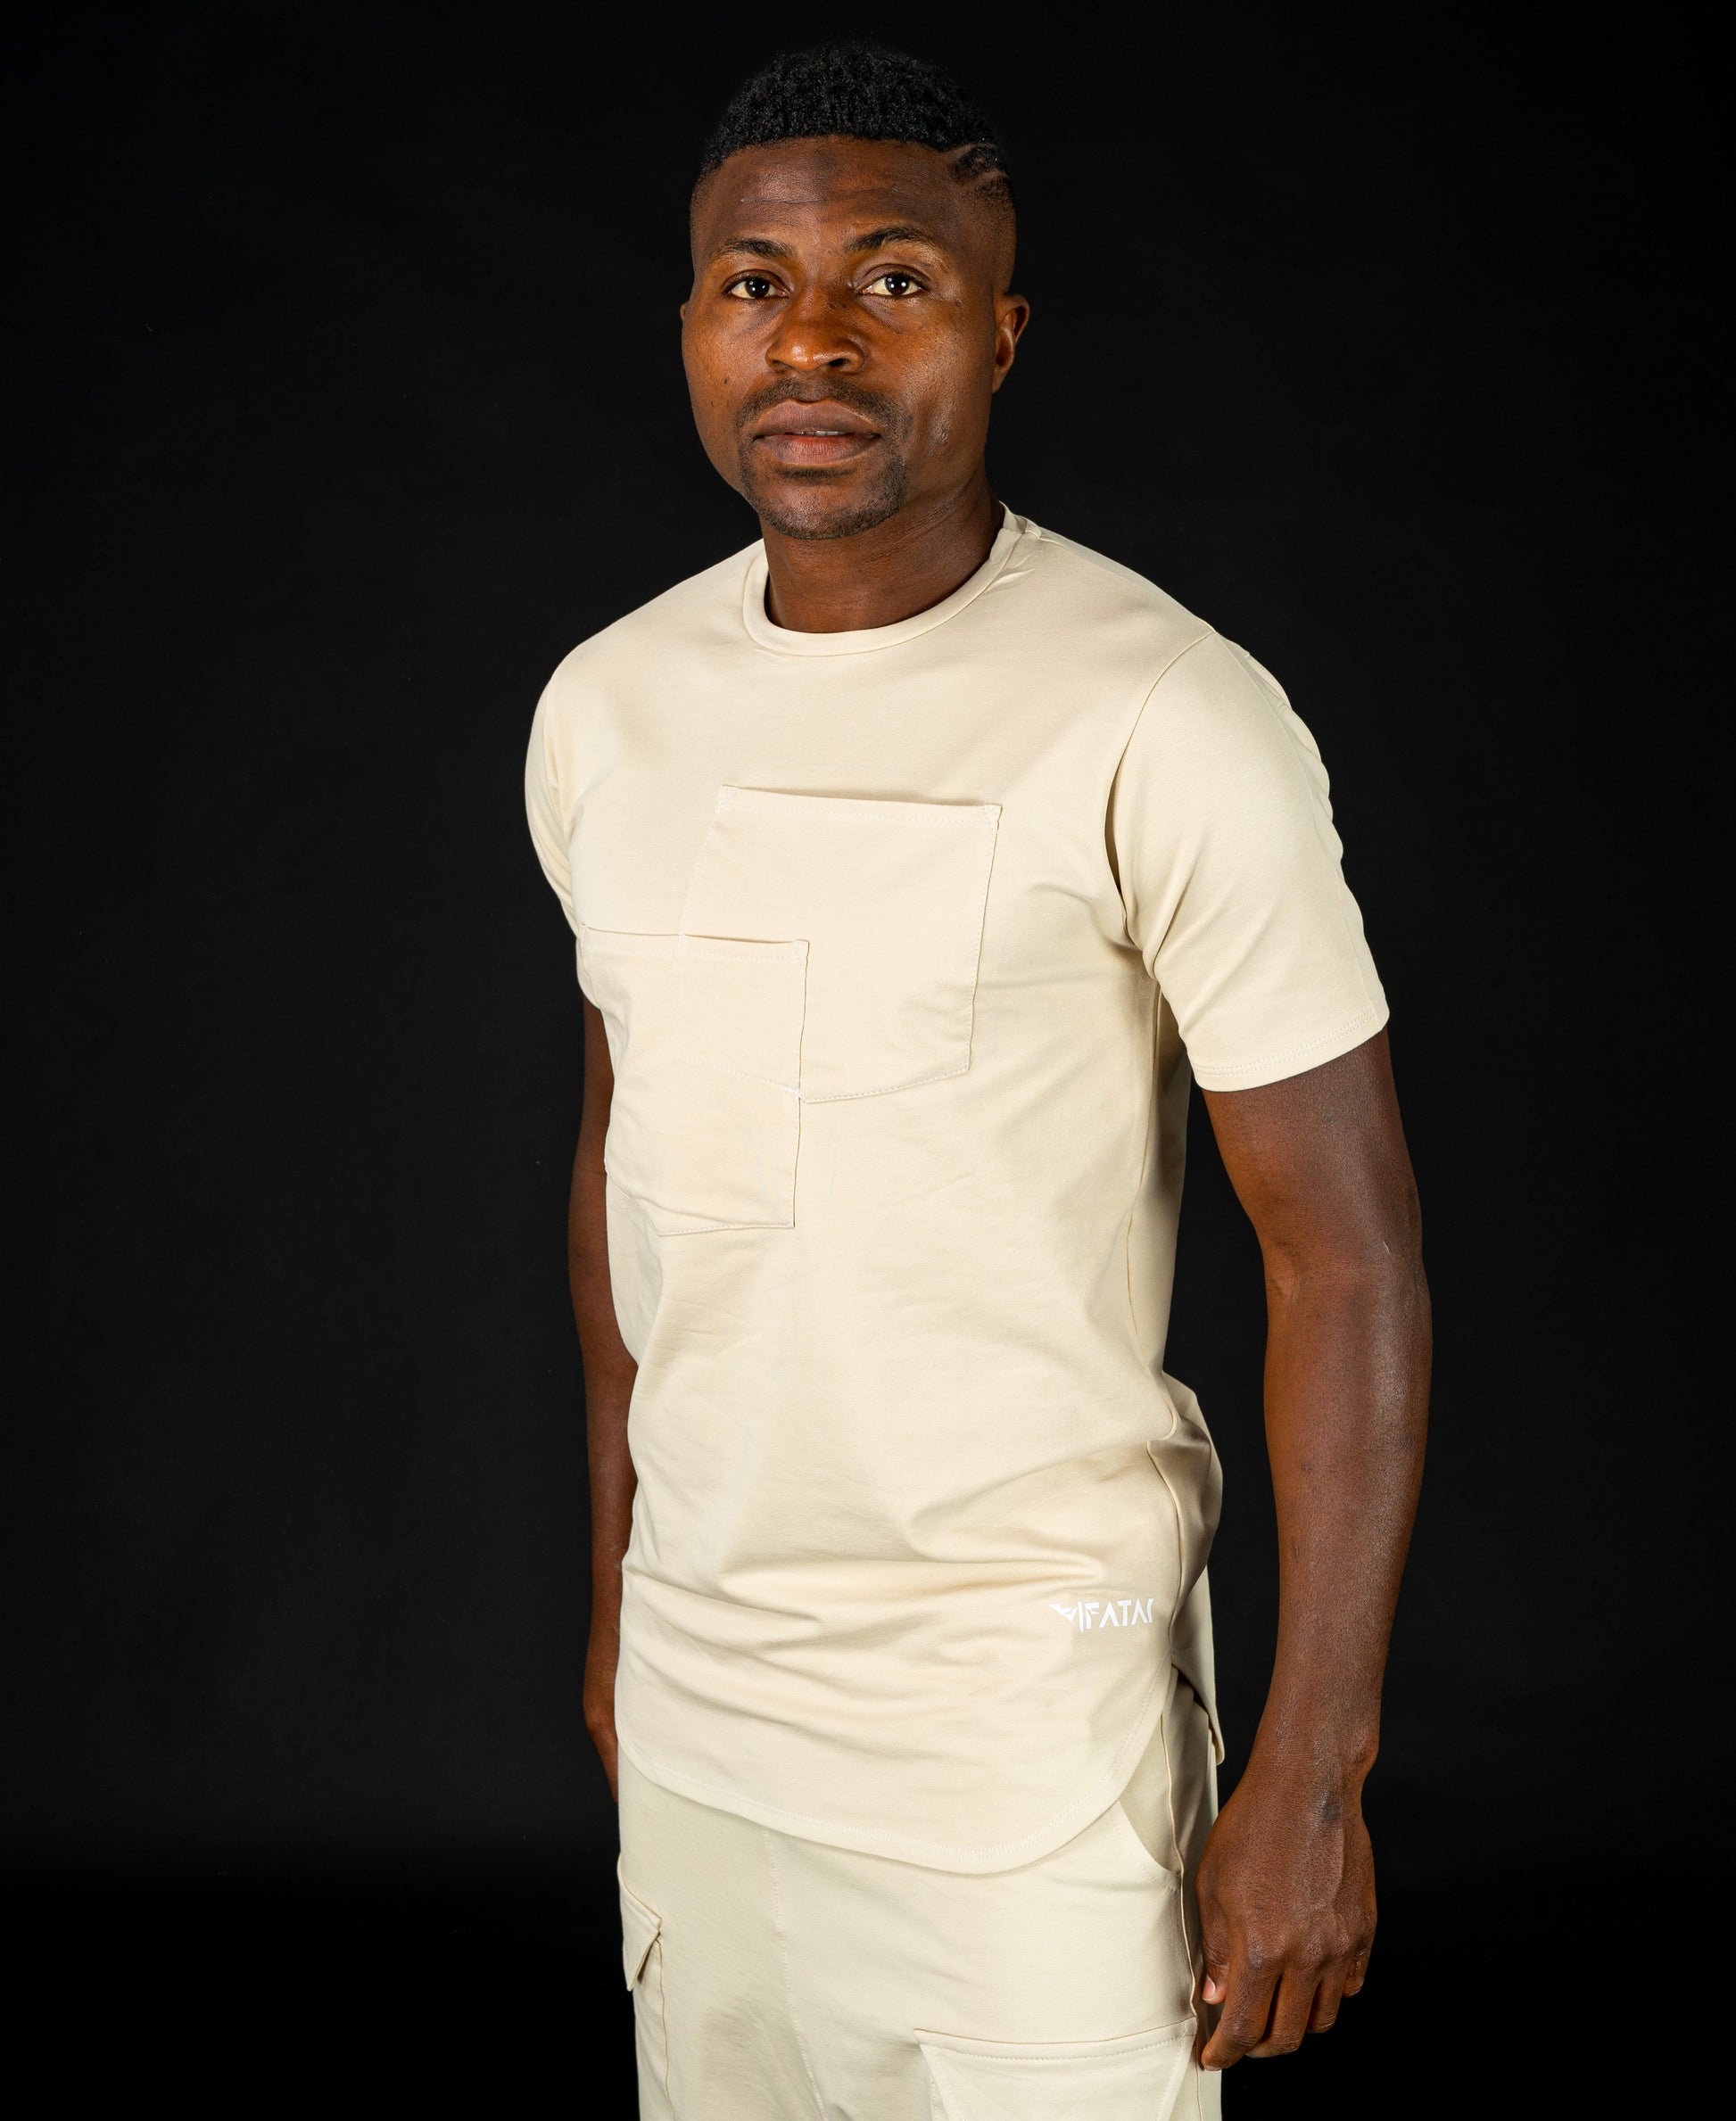 Beige t-shirt with special design - Fatai Style